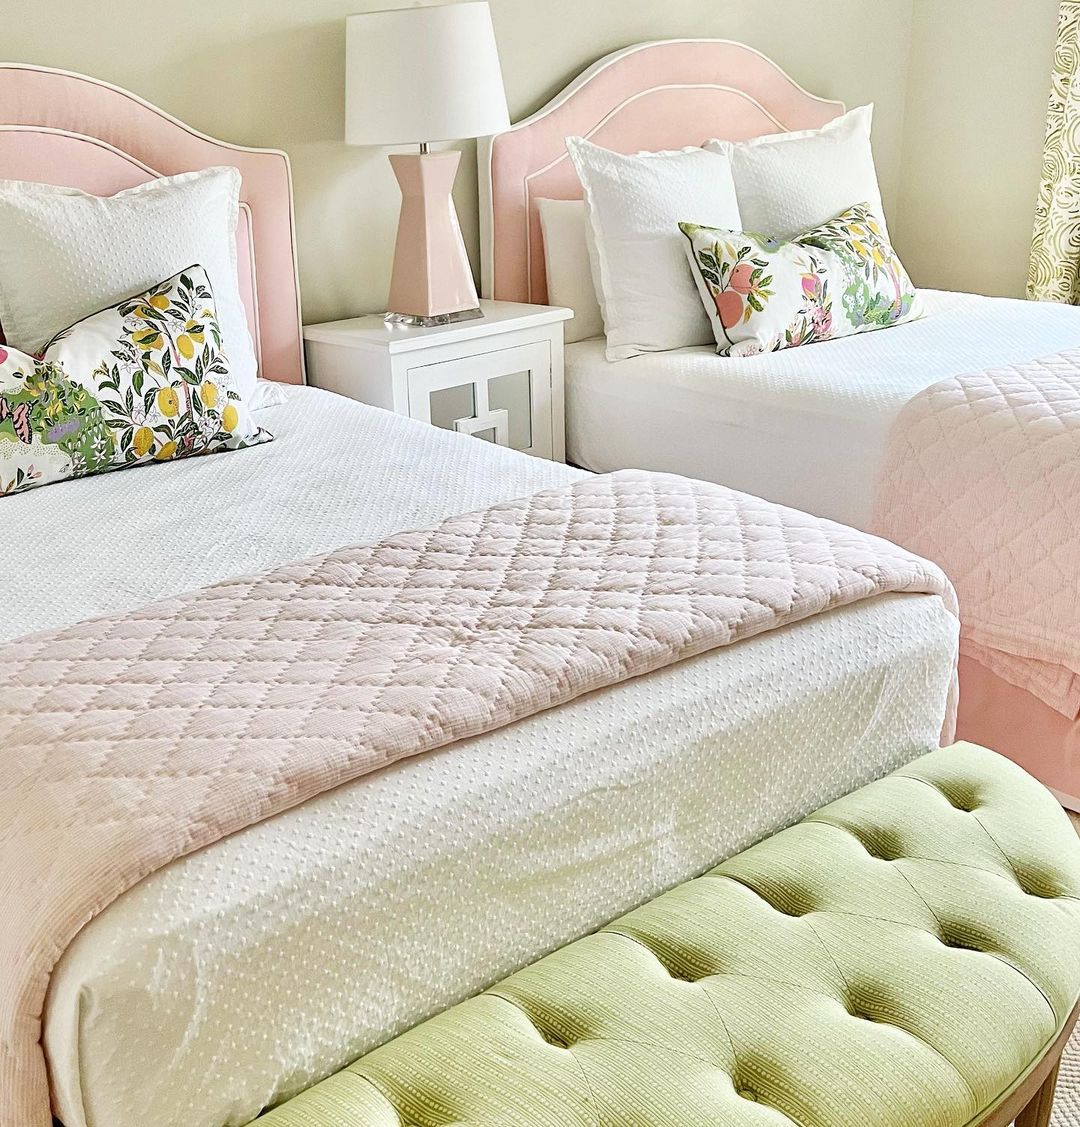 Soft Pastel Harmony for a Relaxing Retreat